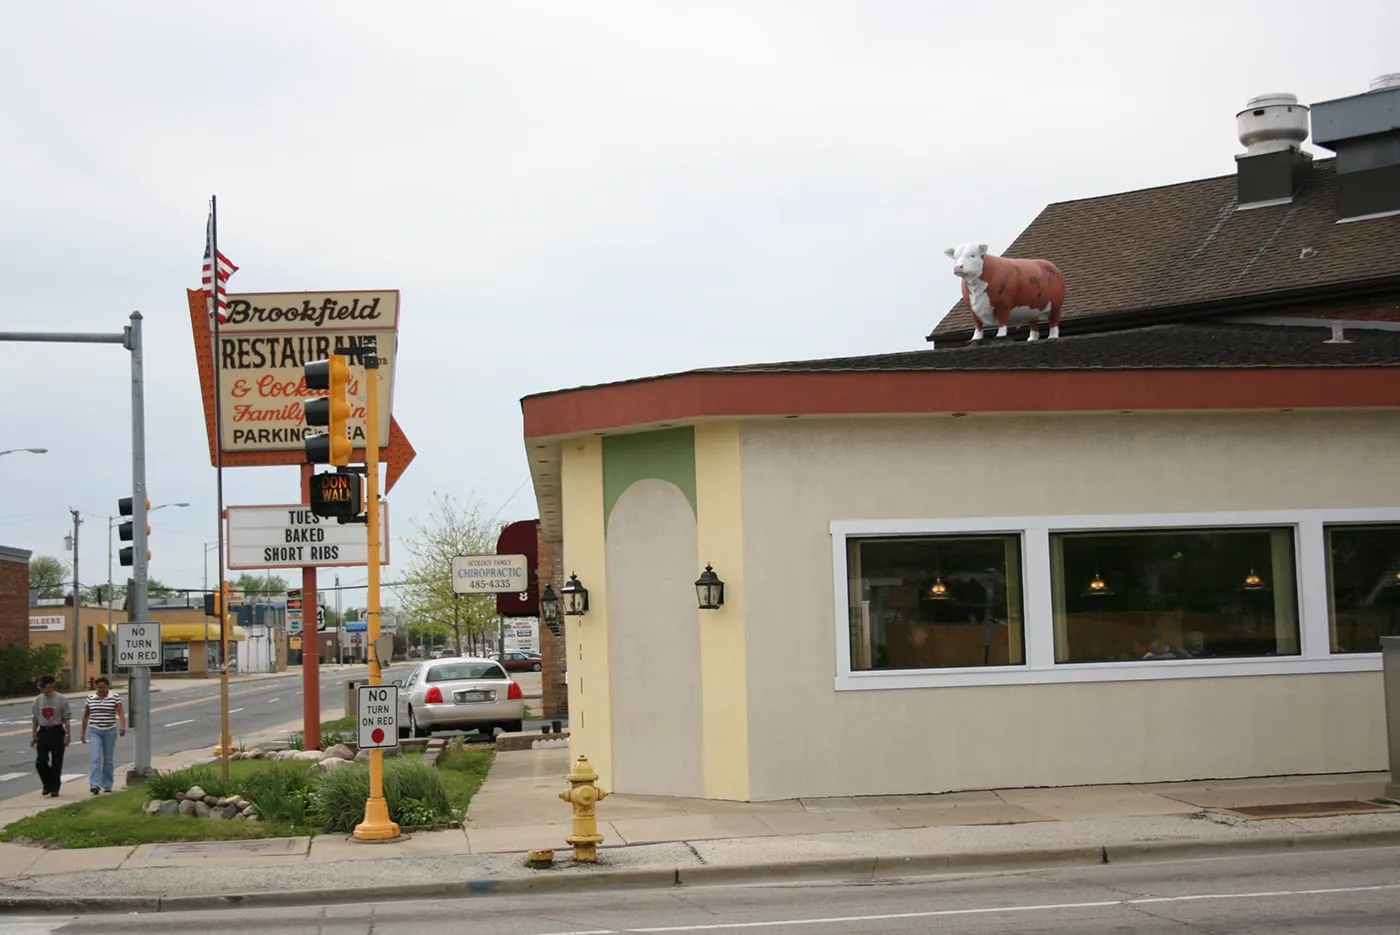 Brookfield Restaurant - restaurant with a cow on it's roof in Brookfield, Illinois.